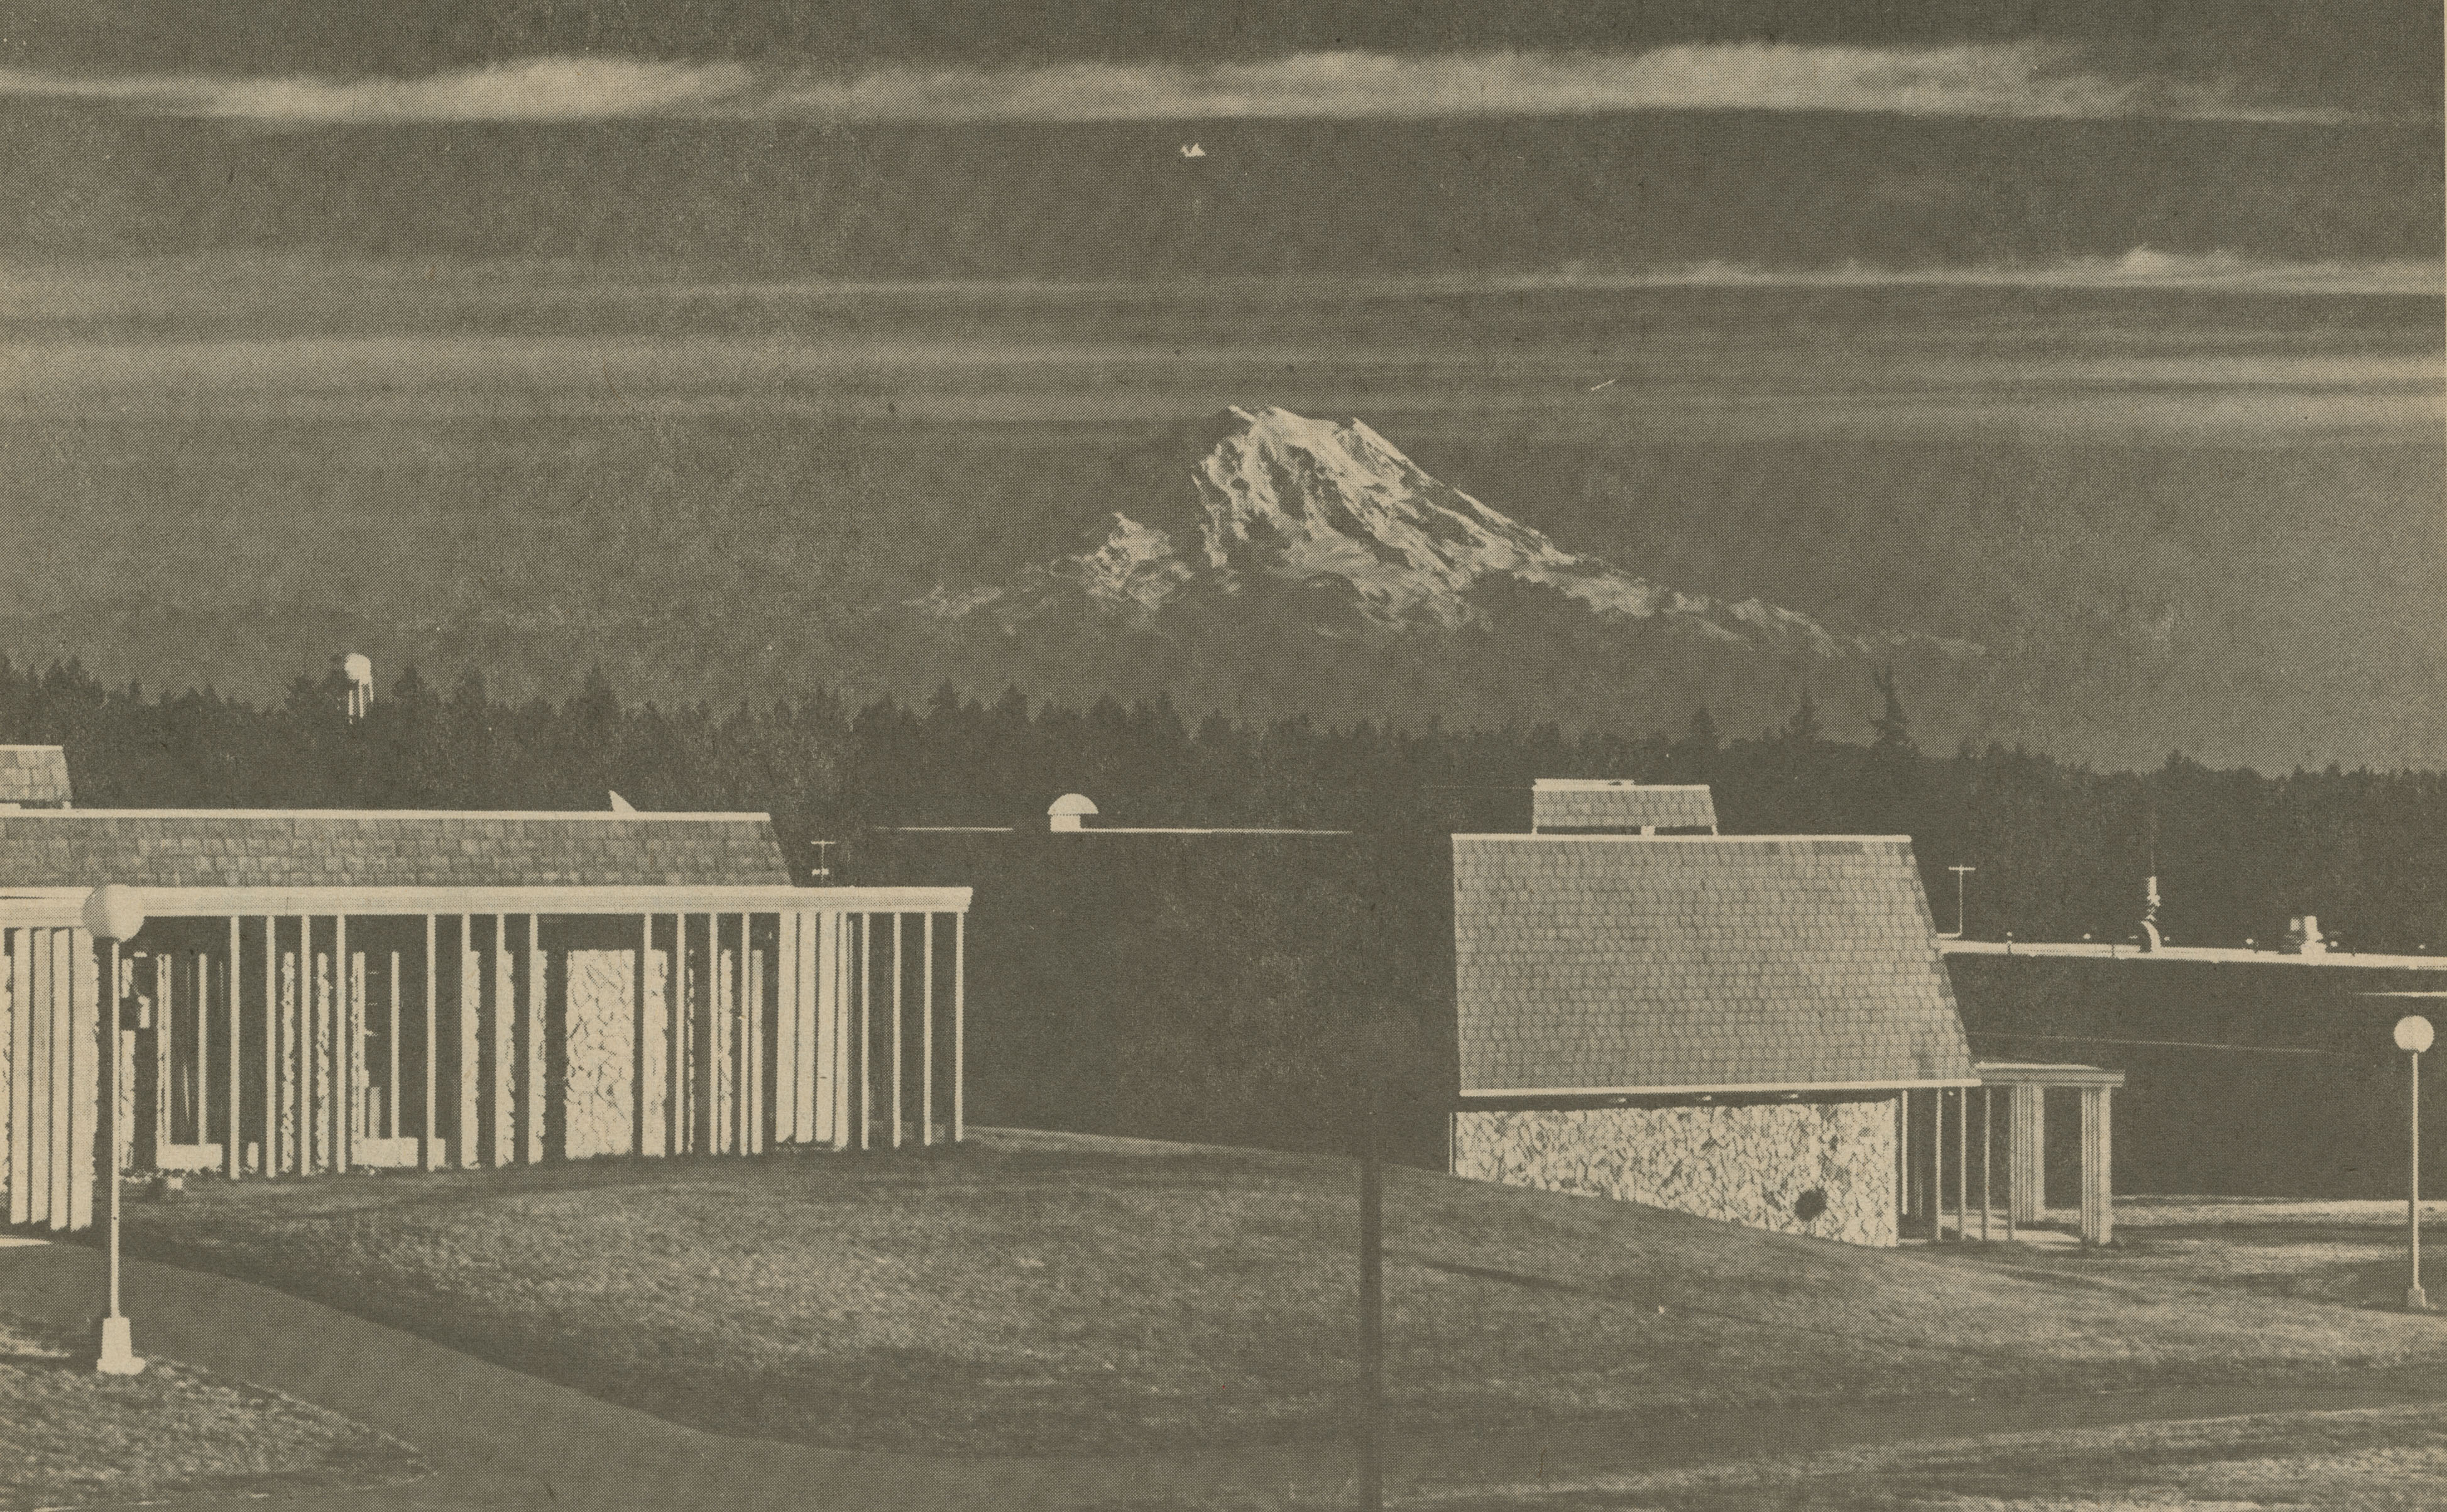 Campus view from The Collegiate Challenge, February 16, 1968